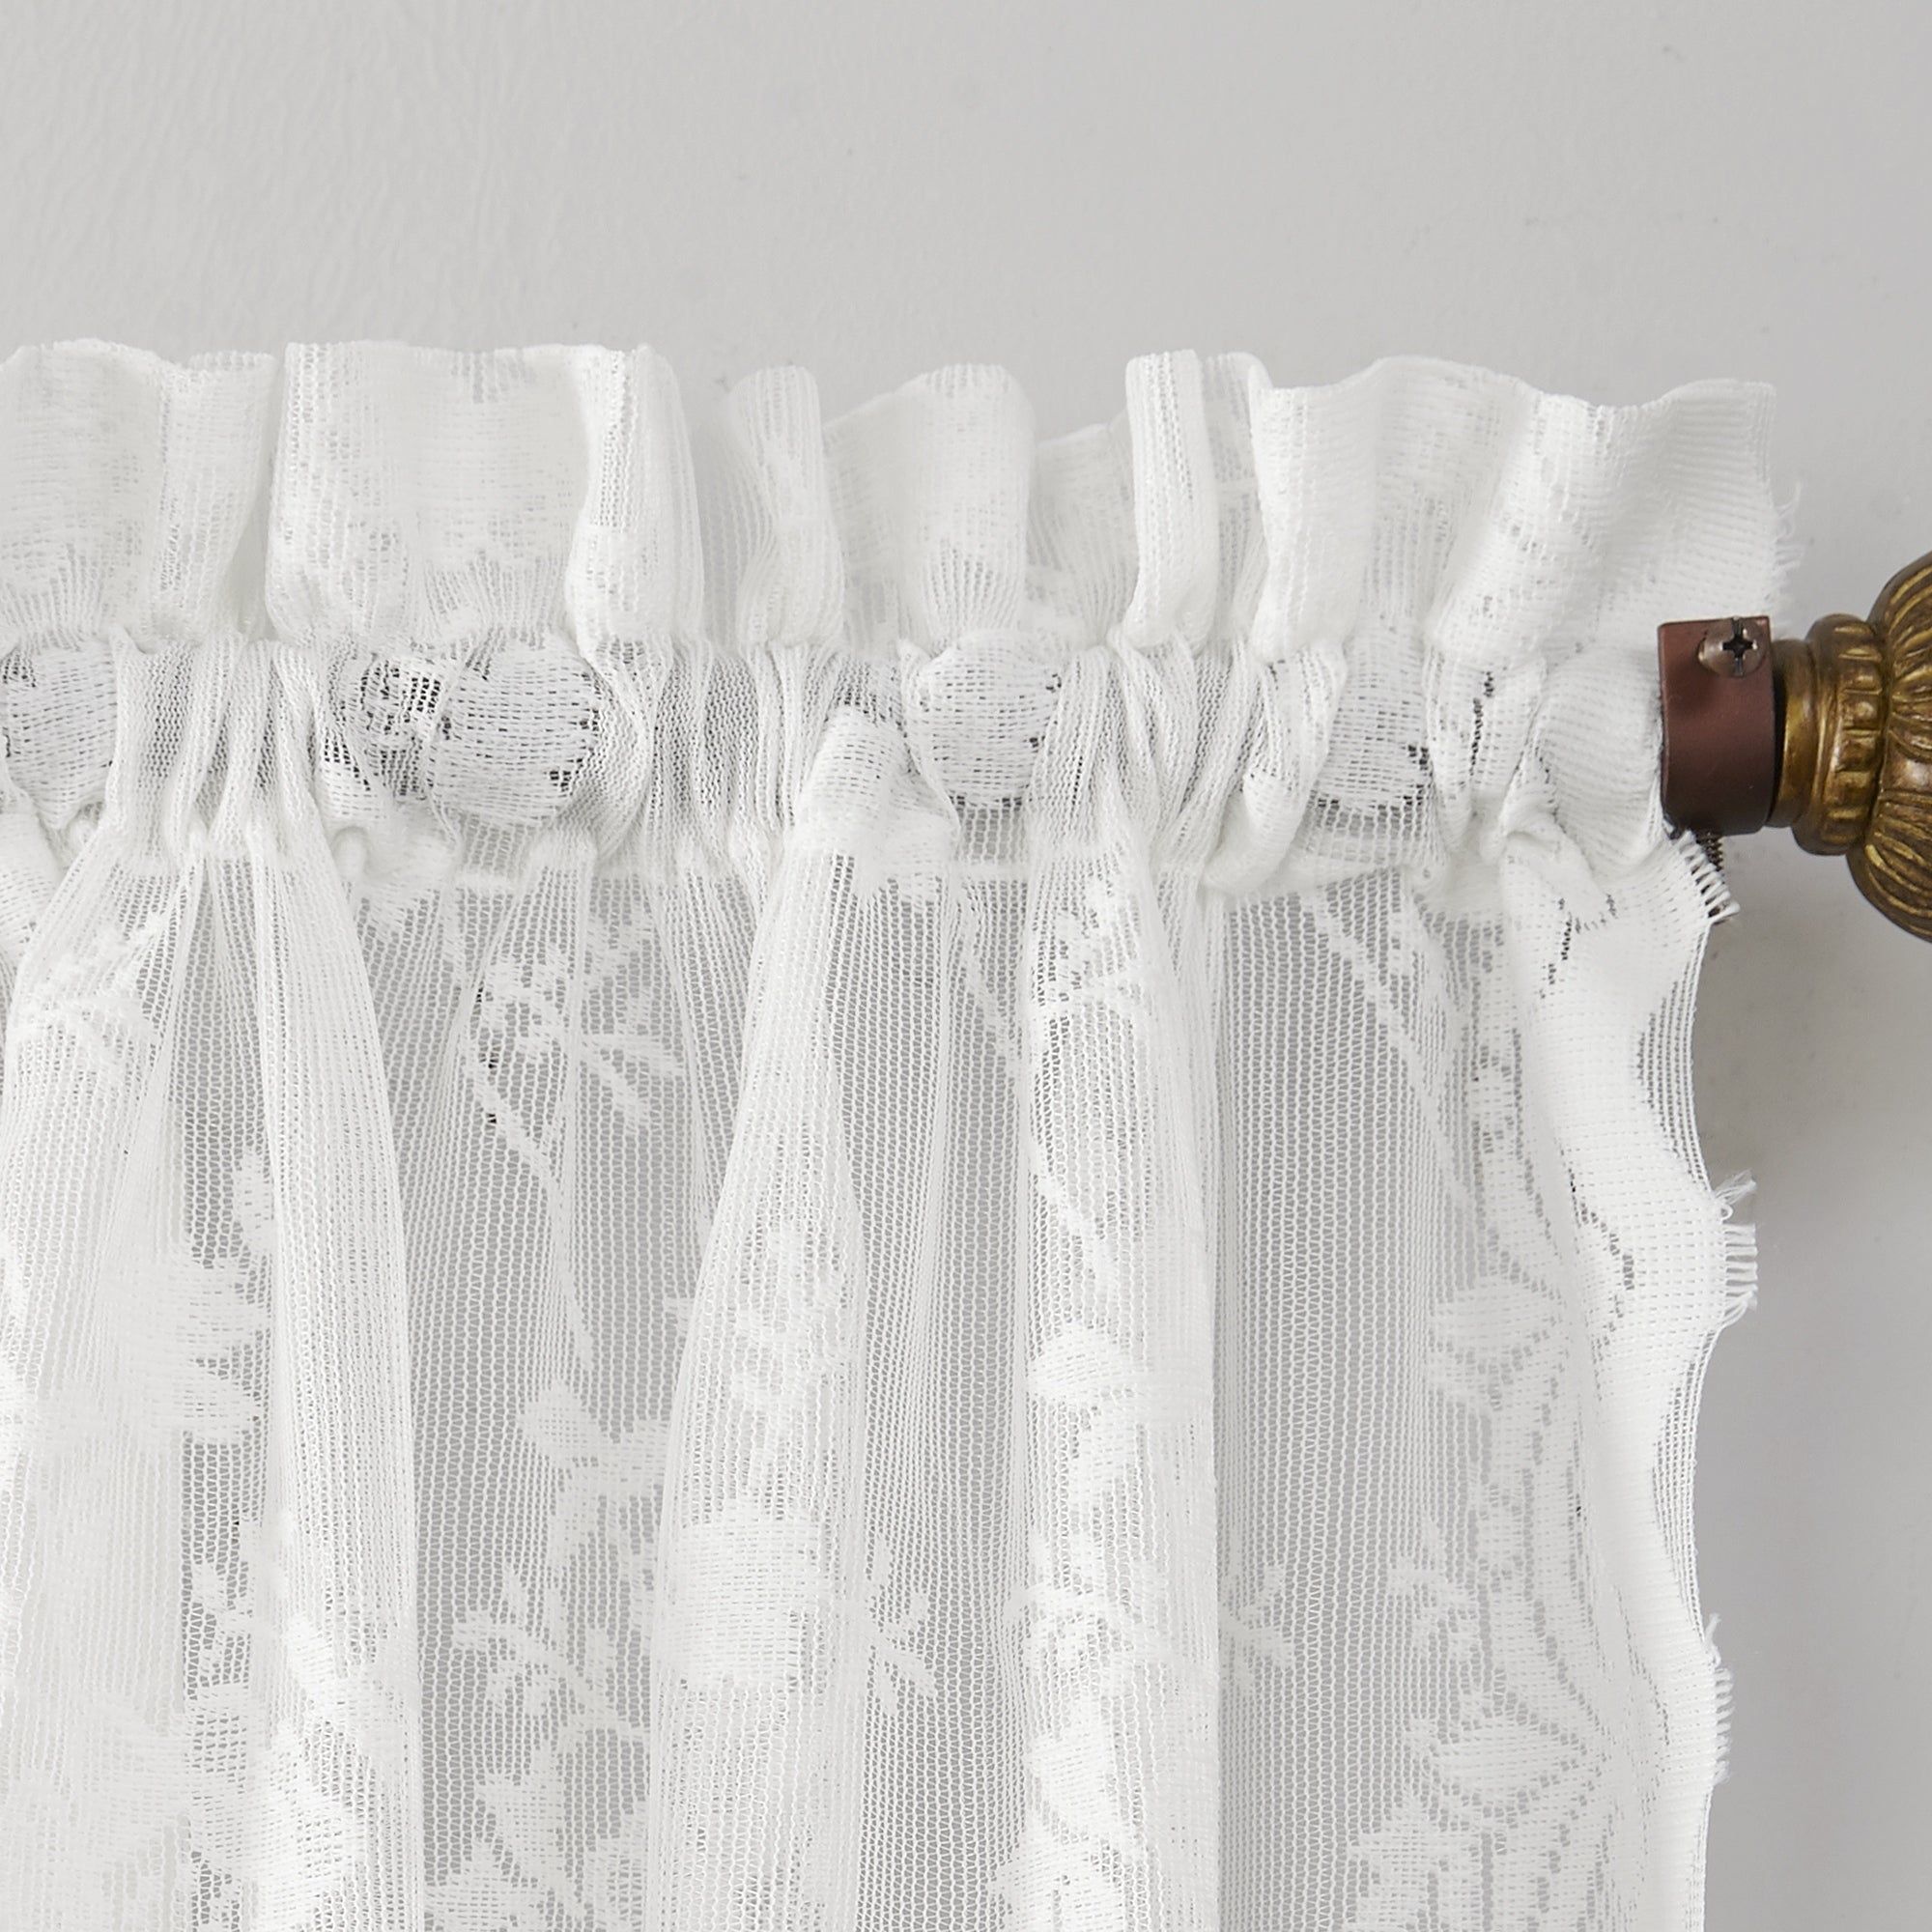 No. 918 Alison Sheer Lace Elongated Kitchen Curtain Tier Pair Throughout Sheer Lace Elongated Kitchen Curtain Tier Pairs (Photo 2 of 20)